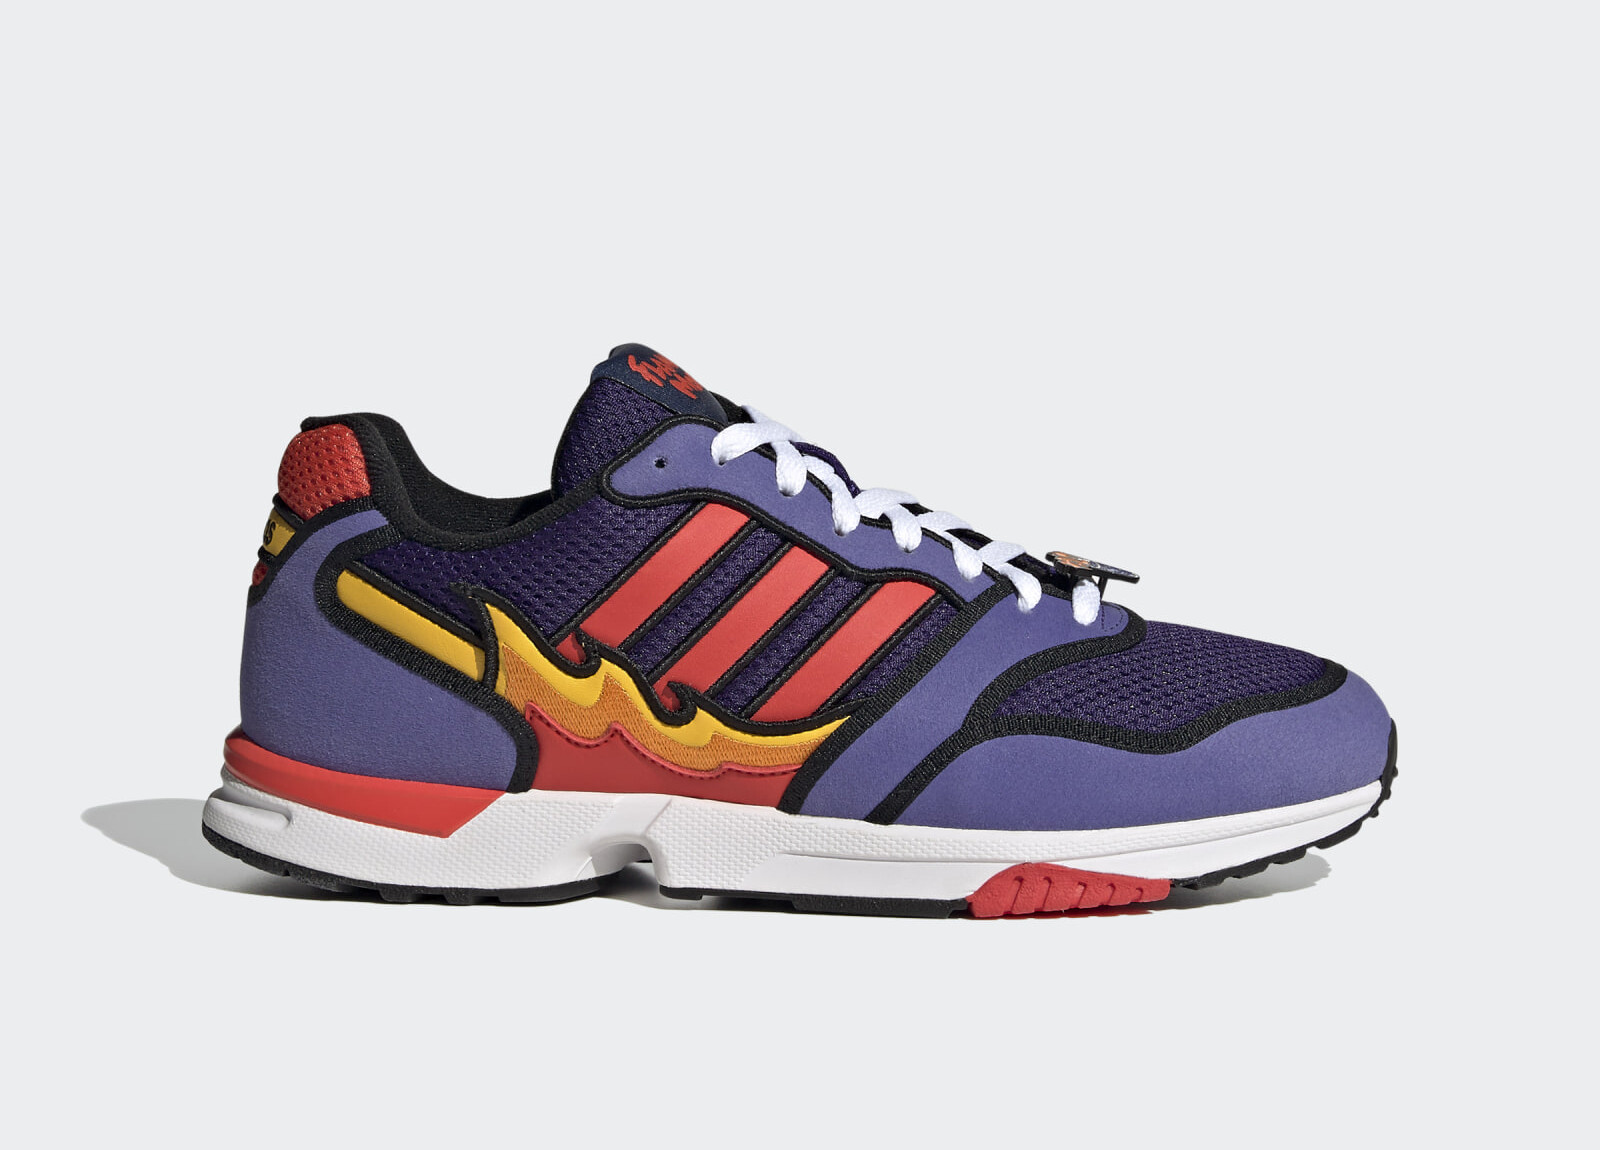 The Simpsons x Adidas
ZX 1000
« Flaming Moe’s »